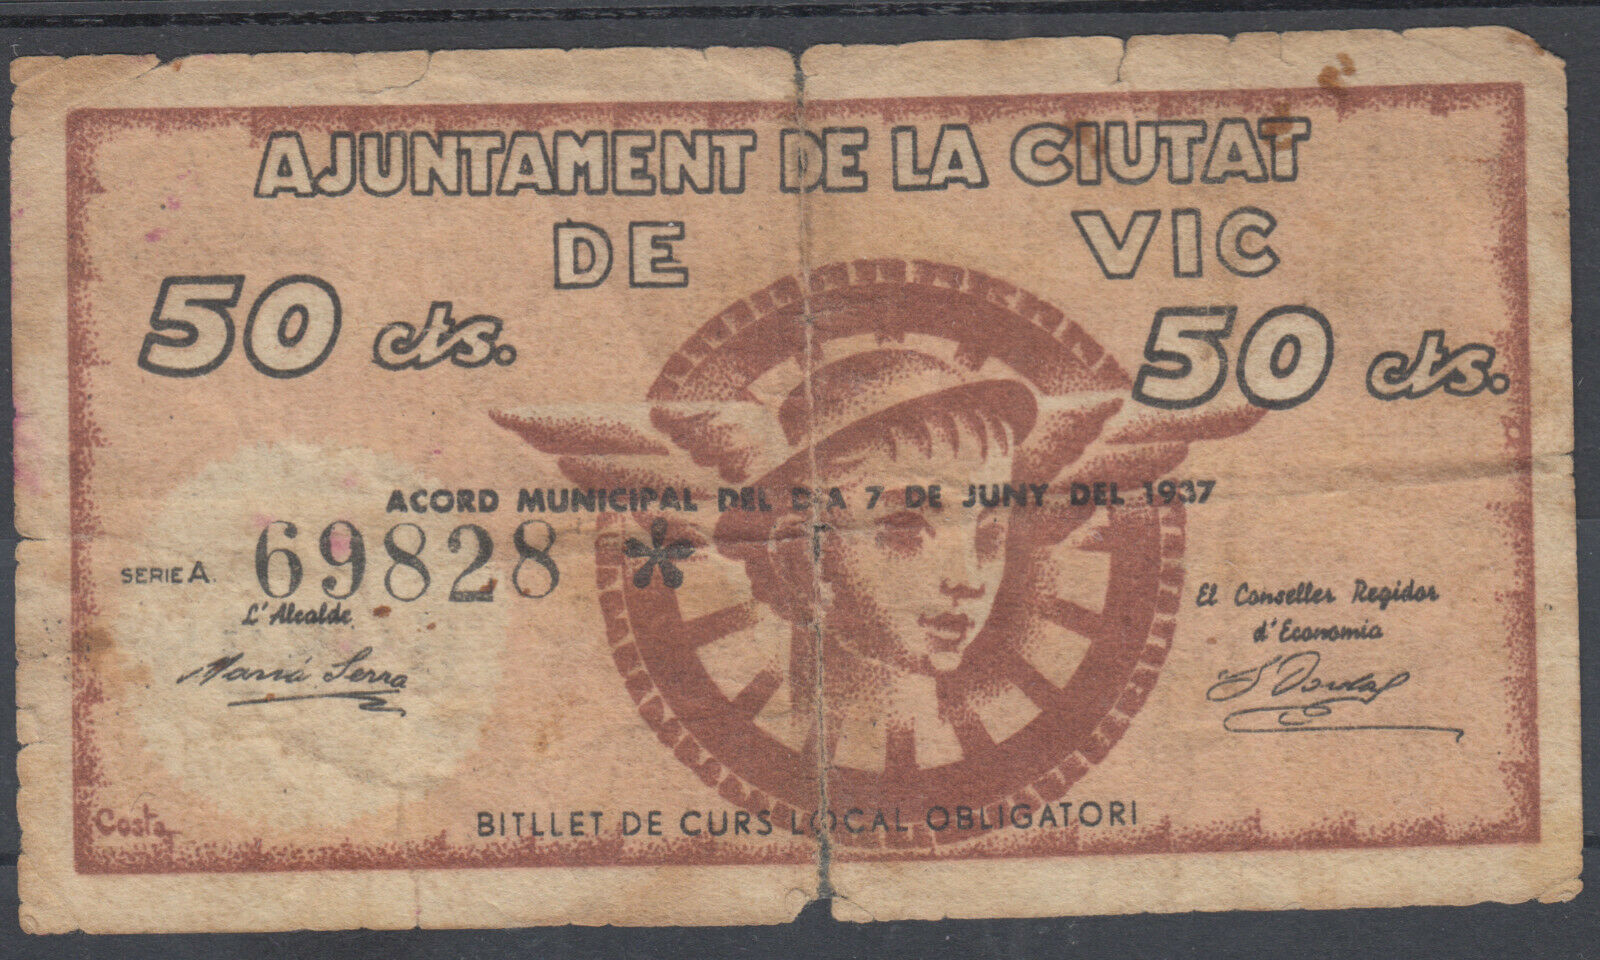 LOCAL BANKNOTE - VIC - 50 CTS. YEAR 1937 - SERIES A                             BILL0042a_VIC